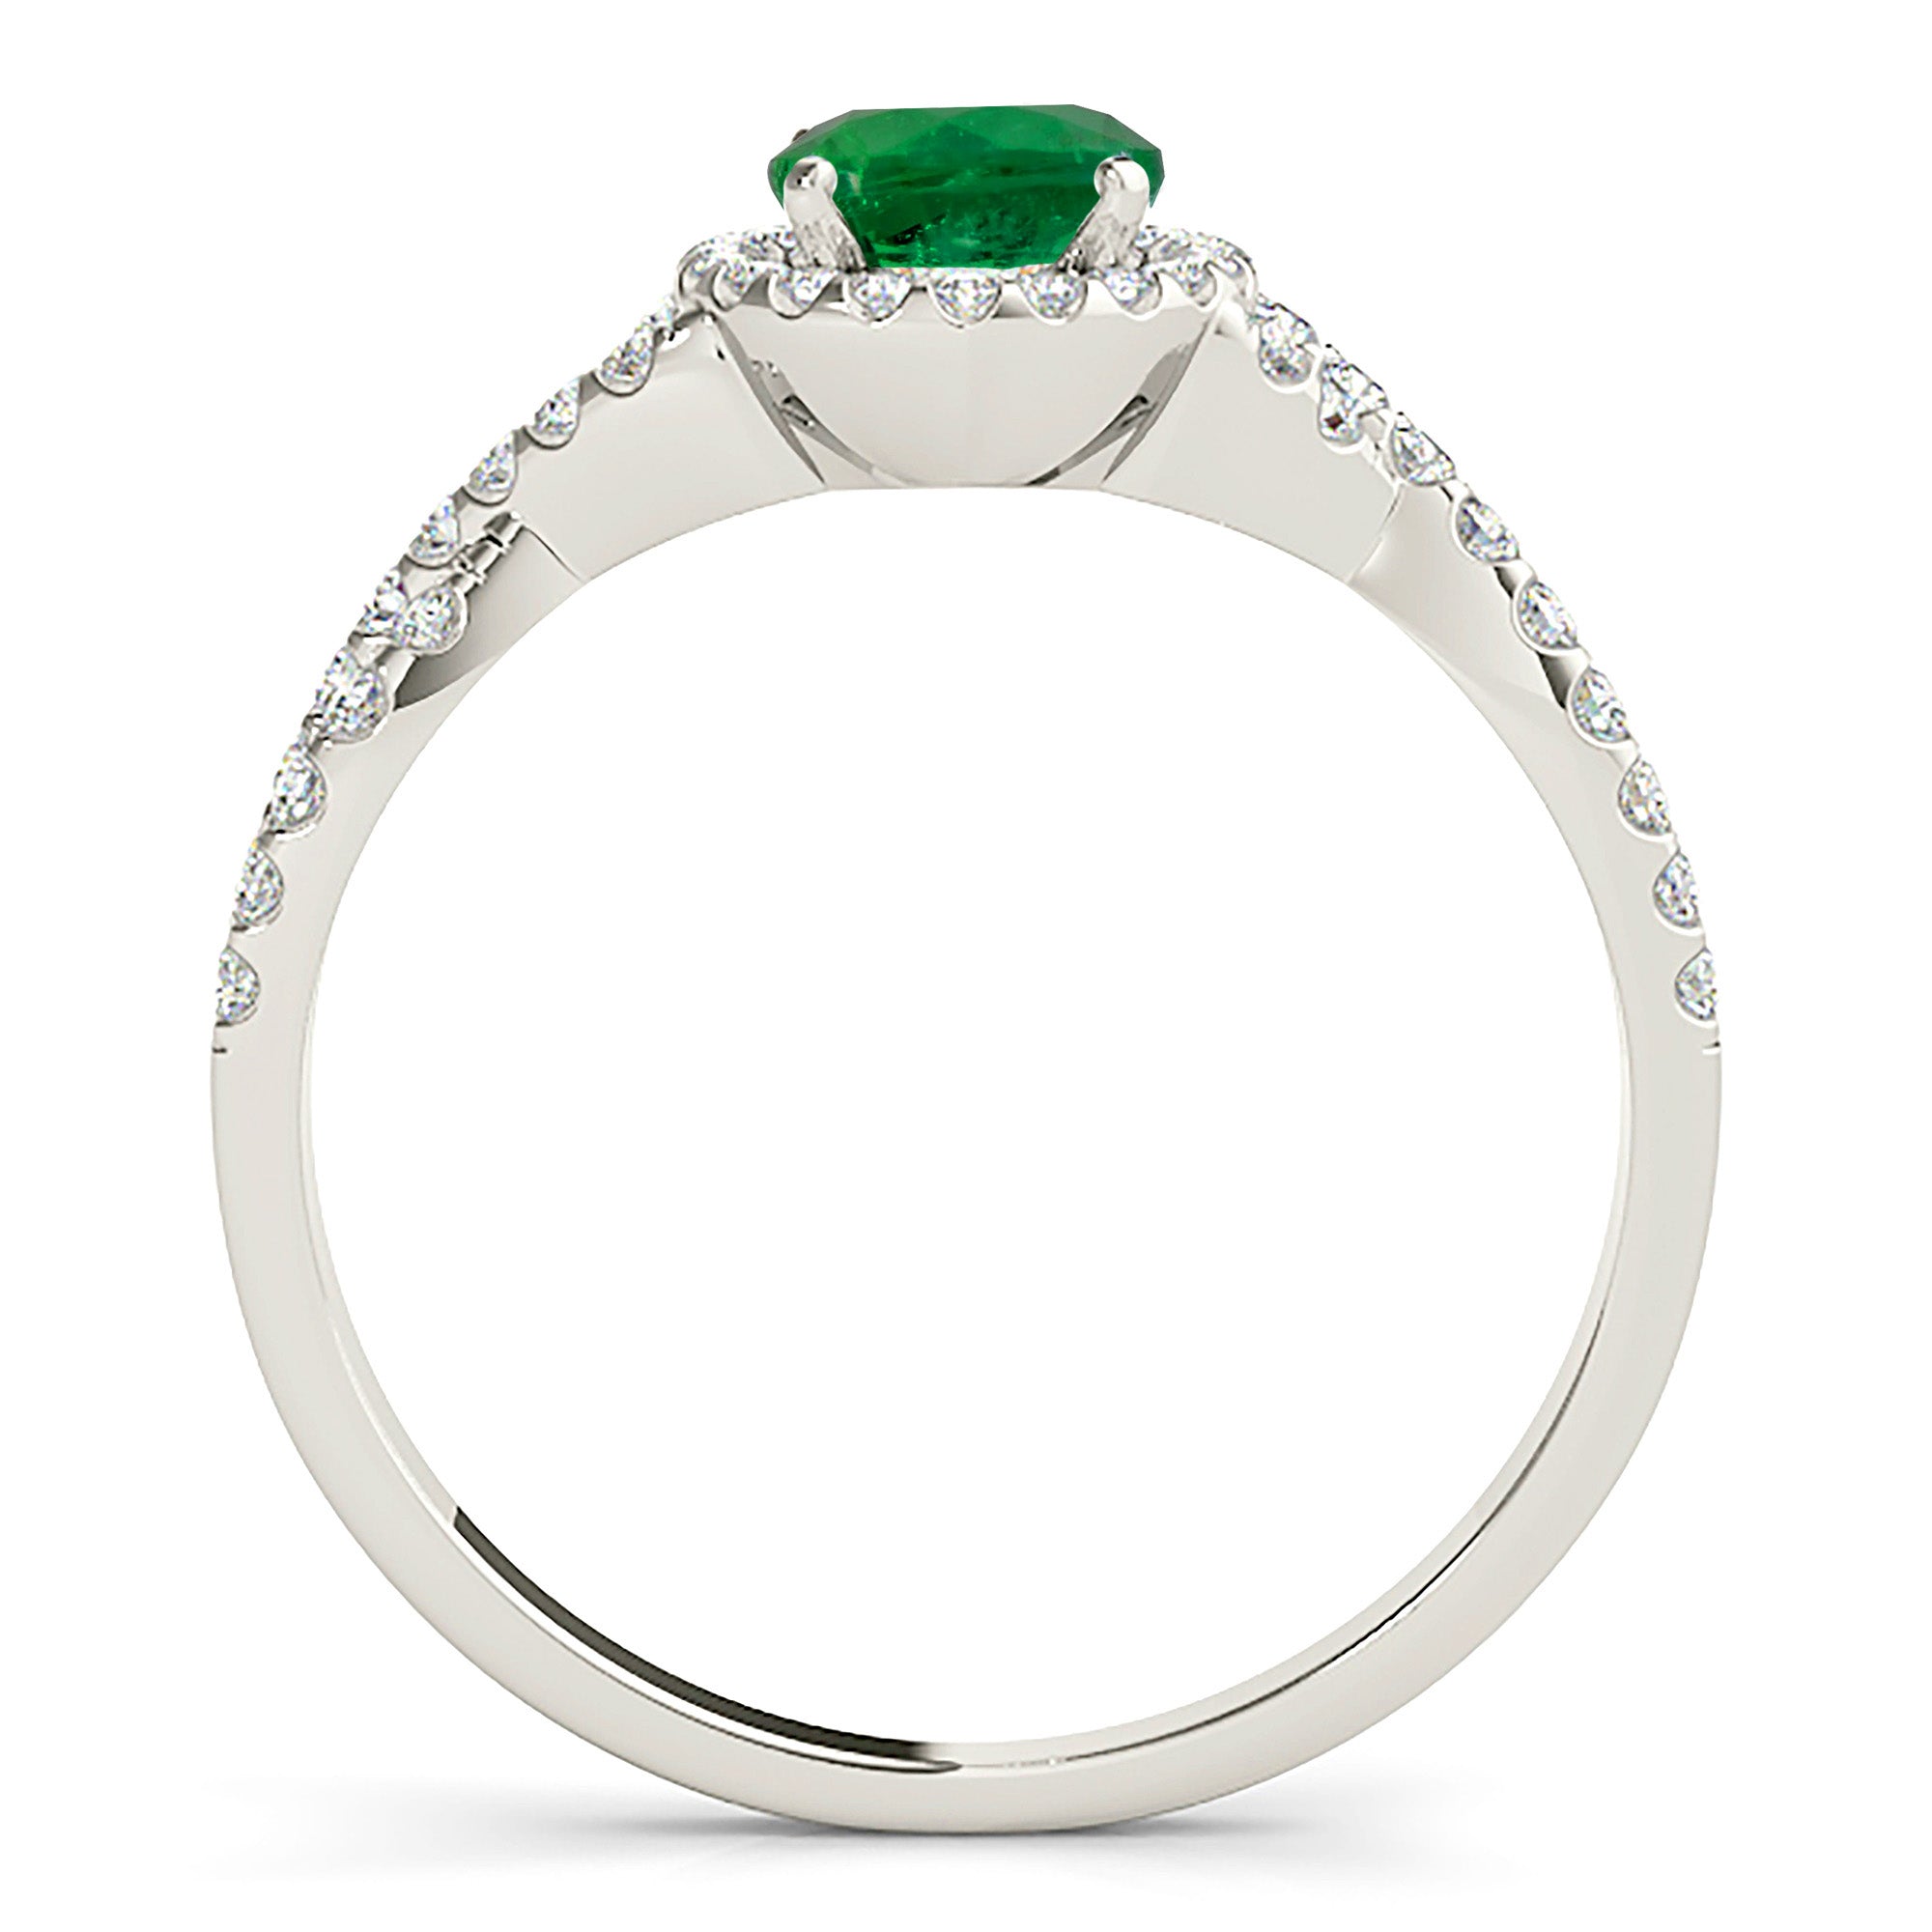 1.14 ct. Genuine Emerald Ring With 0.25 ctw. Diamond Halo And Open Twist Diamond Band-in 14K/18K White, Yellow, Rose Gold and Platinum - Christmas Jewelry Gift -VIRABYANI